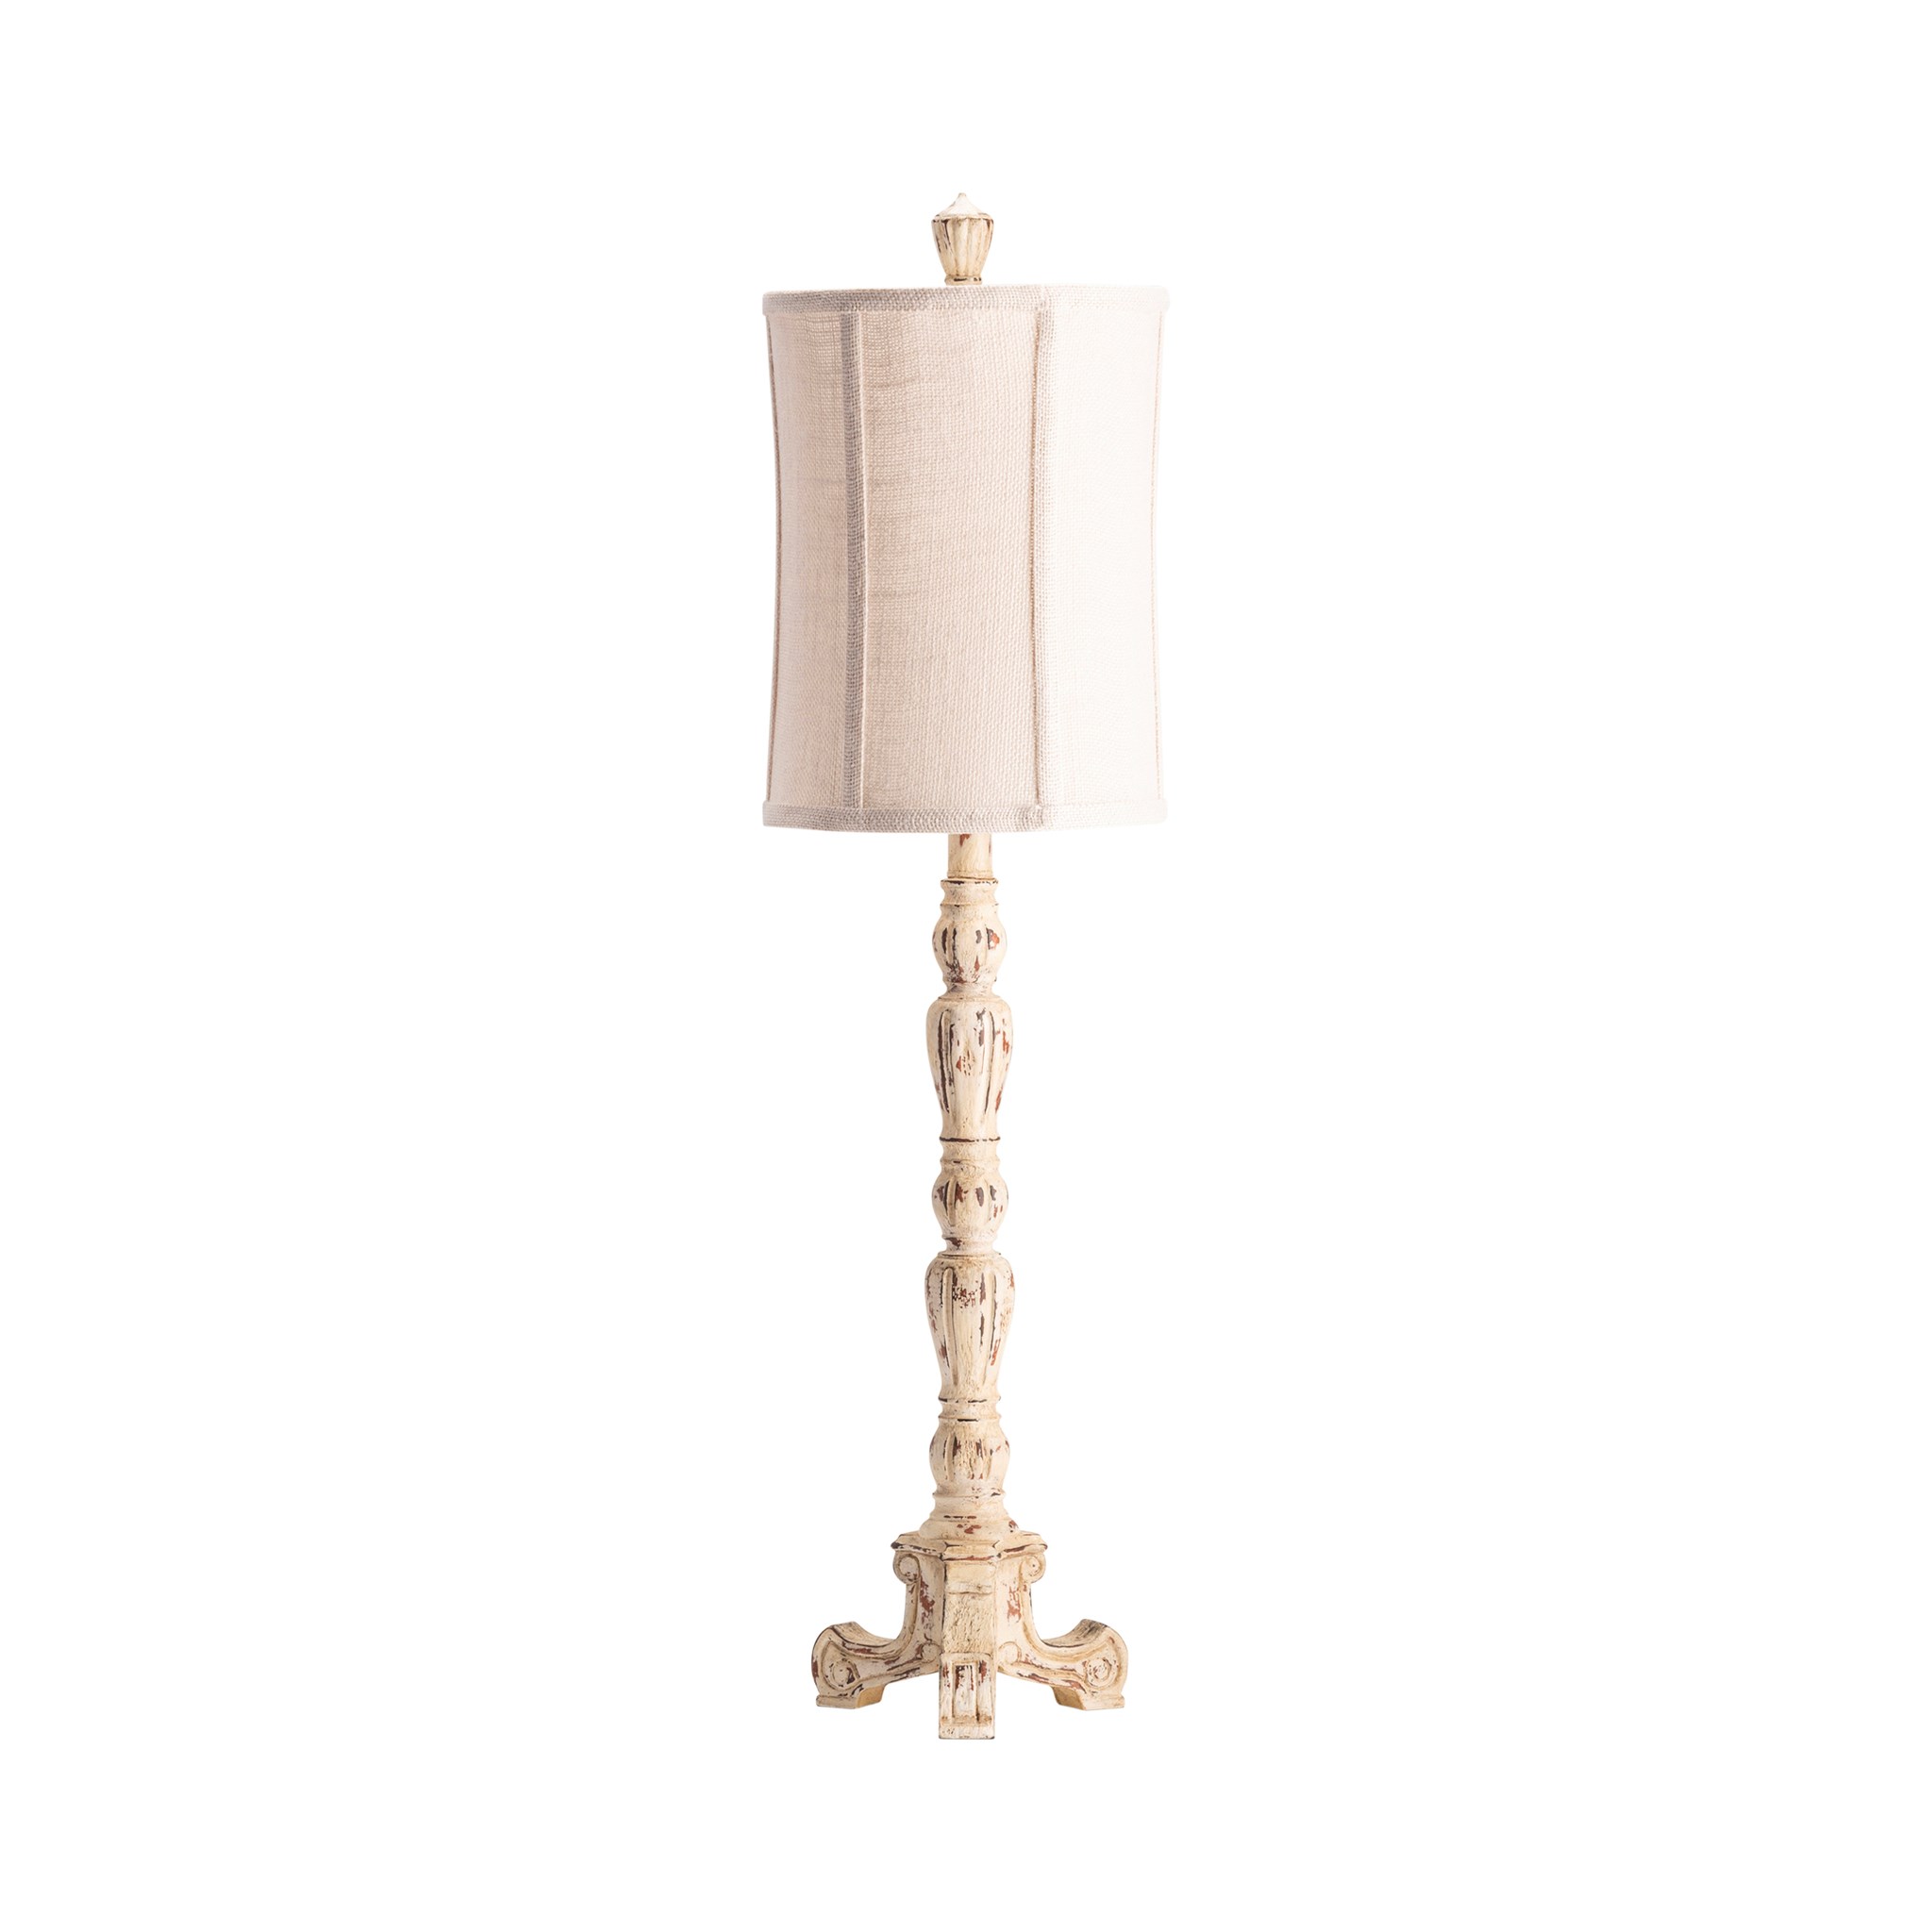 Crestview Collection Lighting Table, Crestview Collection Oil Lantern Table Lamp